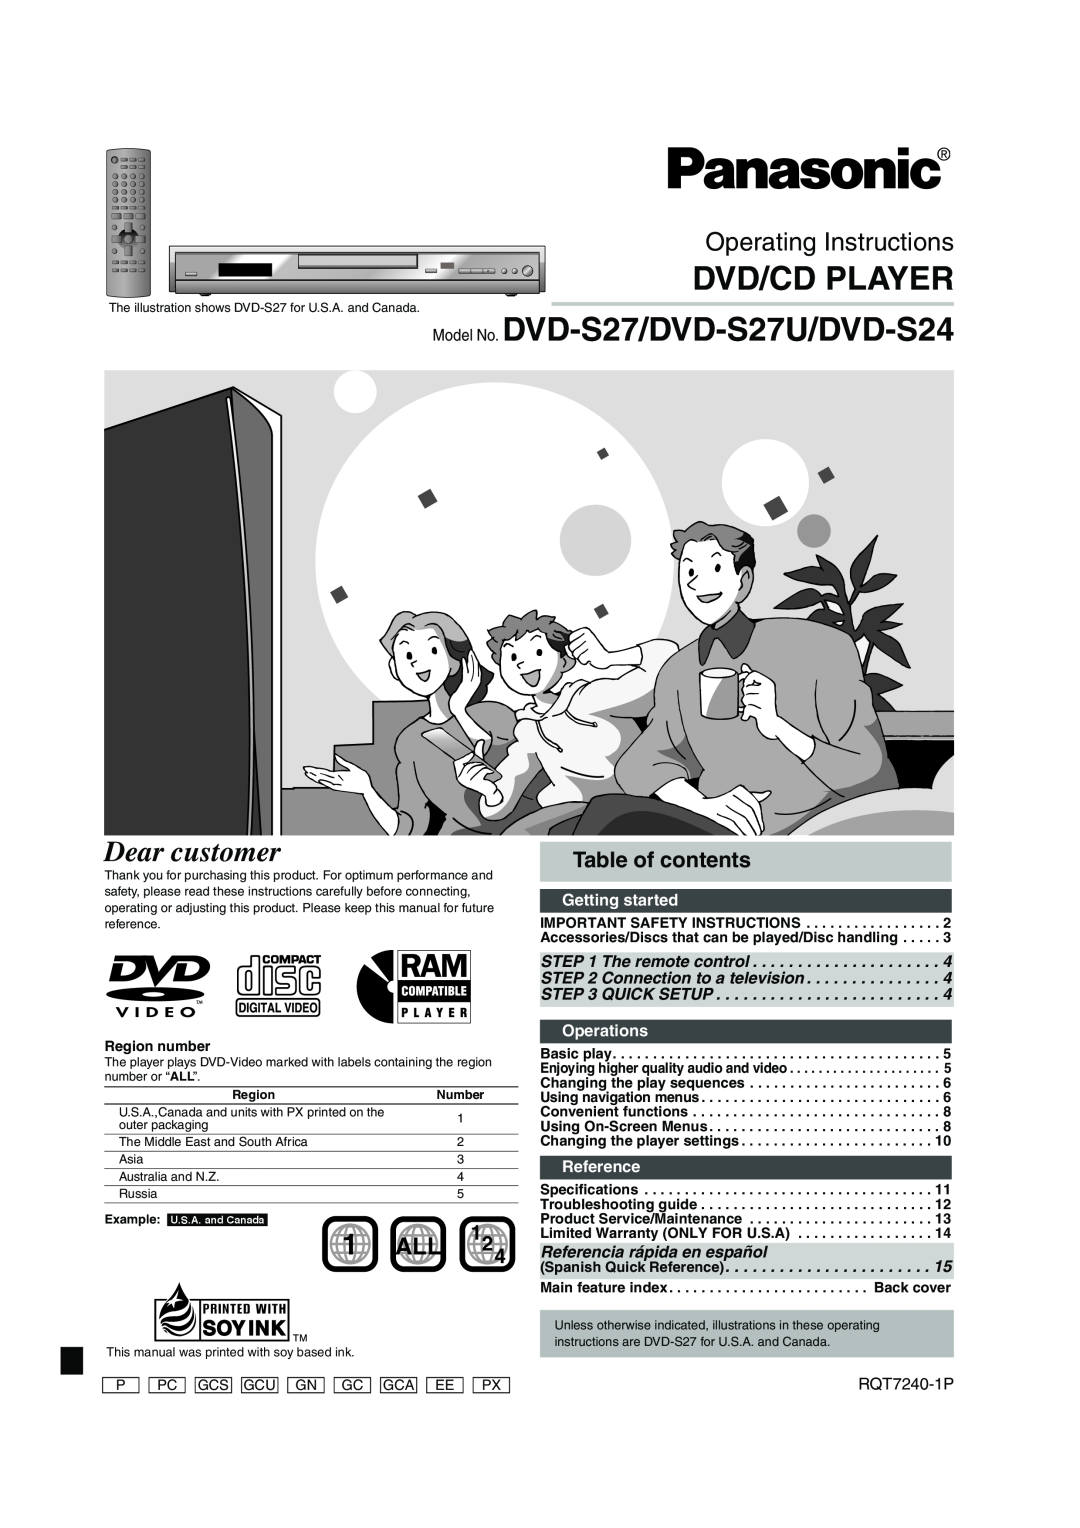 Panasonic DVD-S24 operating instructions Table of contents, Getting started, Operations, Reference, Dvd/Cd Player, 1 ALL 